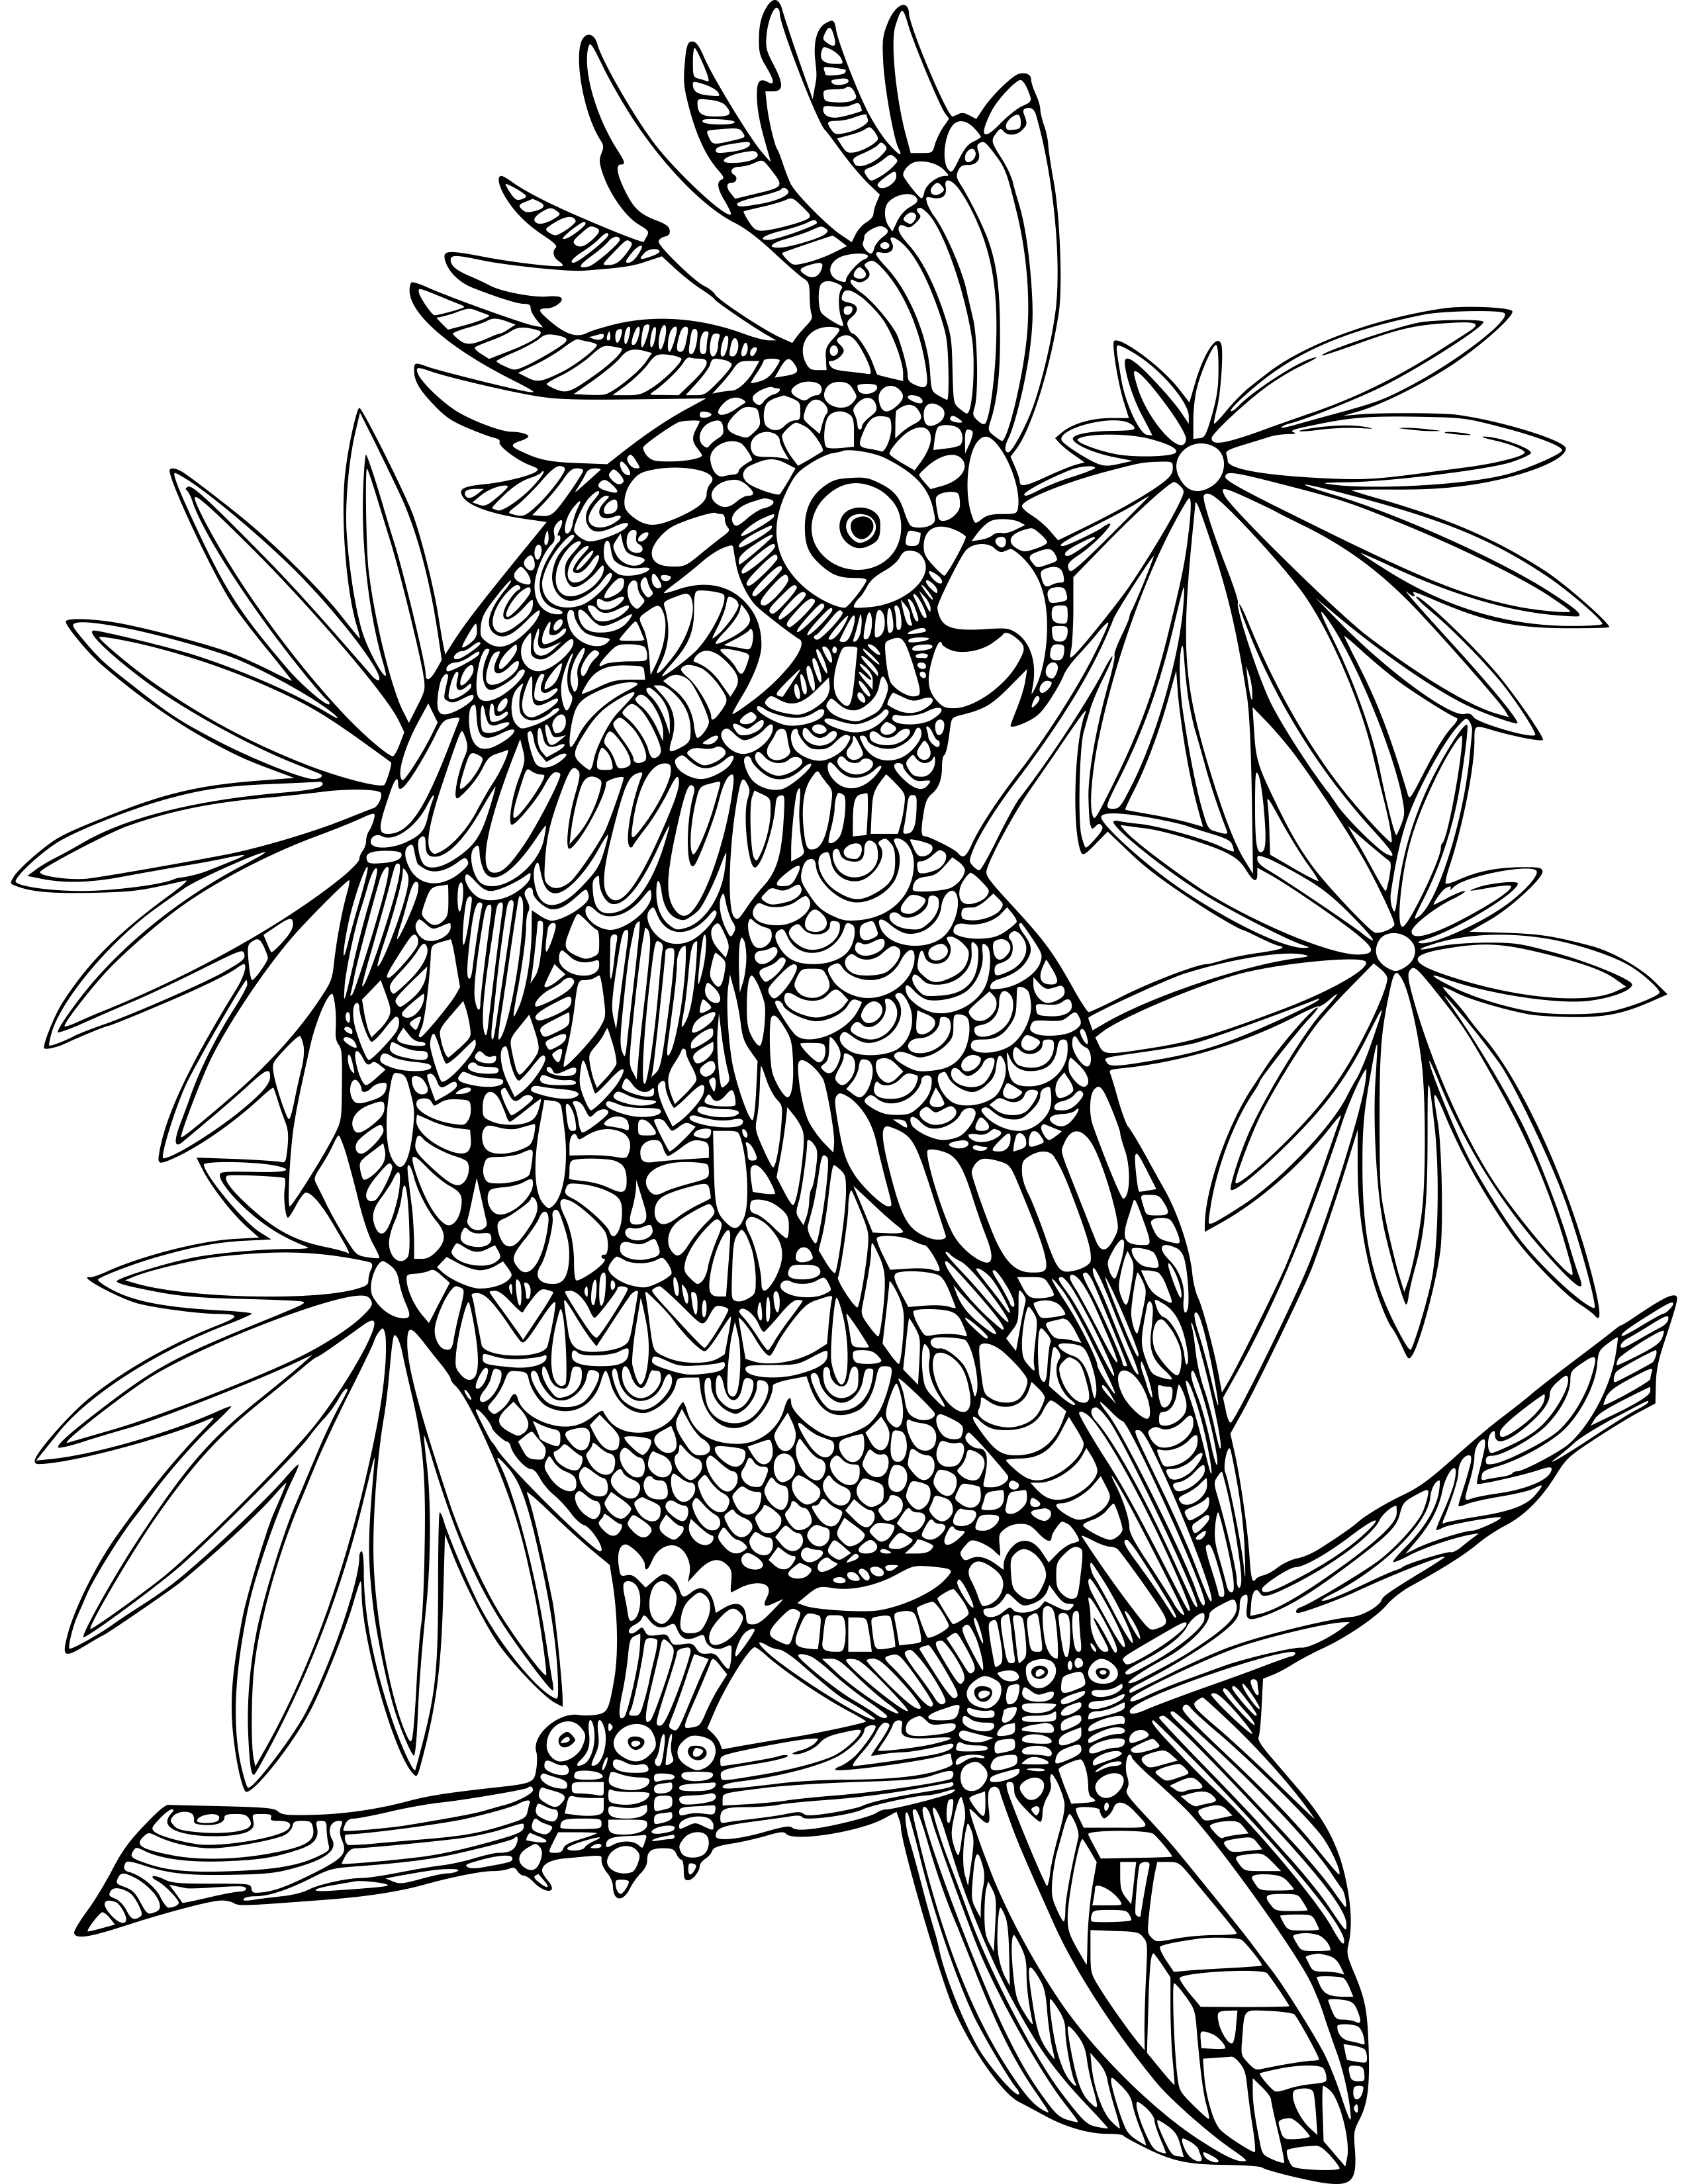 Download 60 Animal Coloring Pages for Adults with Resell Right for $15 - SEOClerks